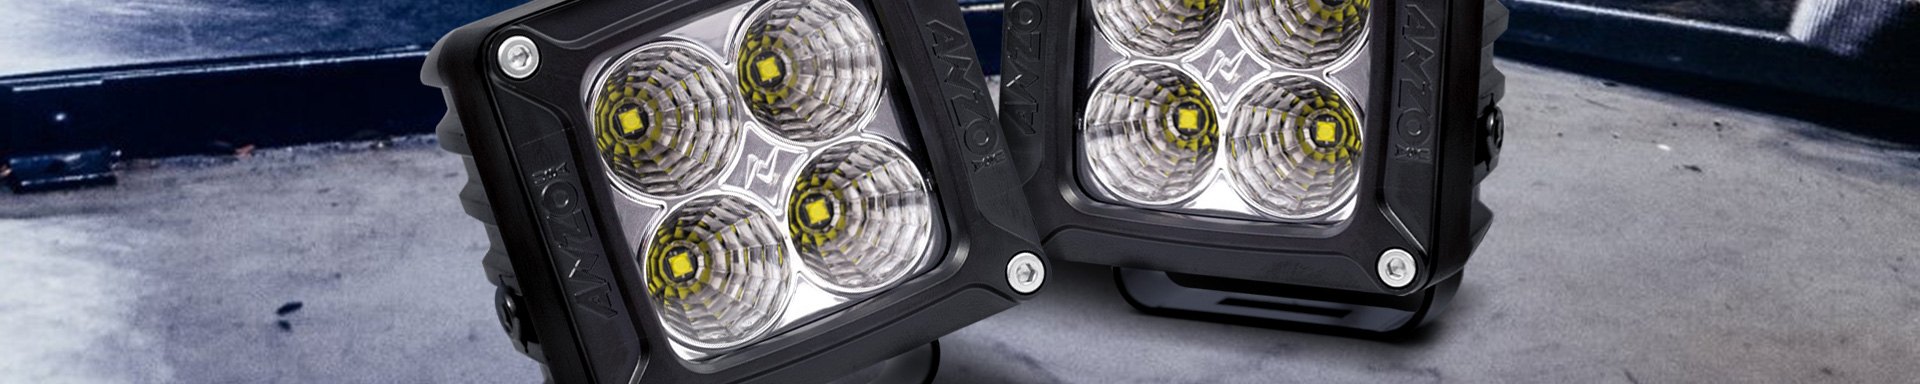 New Rugged High Intensity LED 20W Flood Beam Off-Road Lights by Anzo